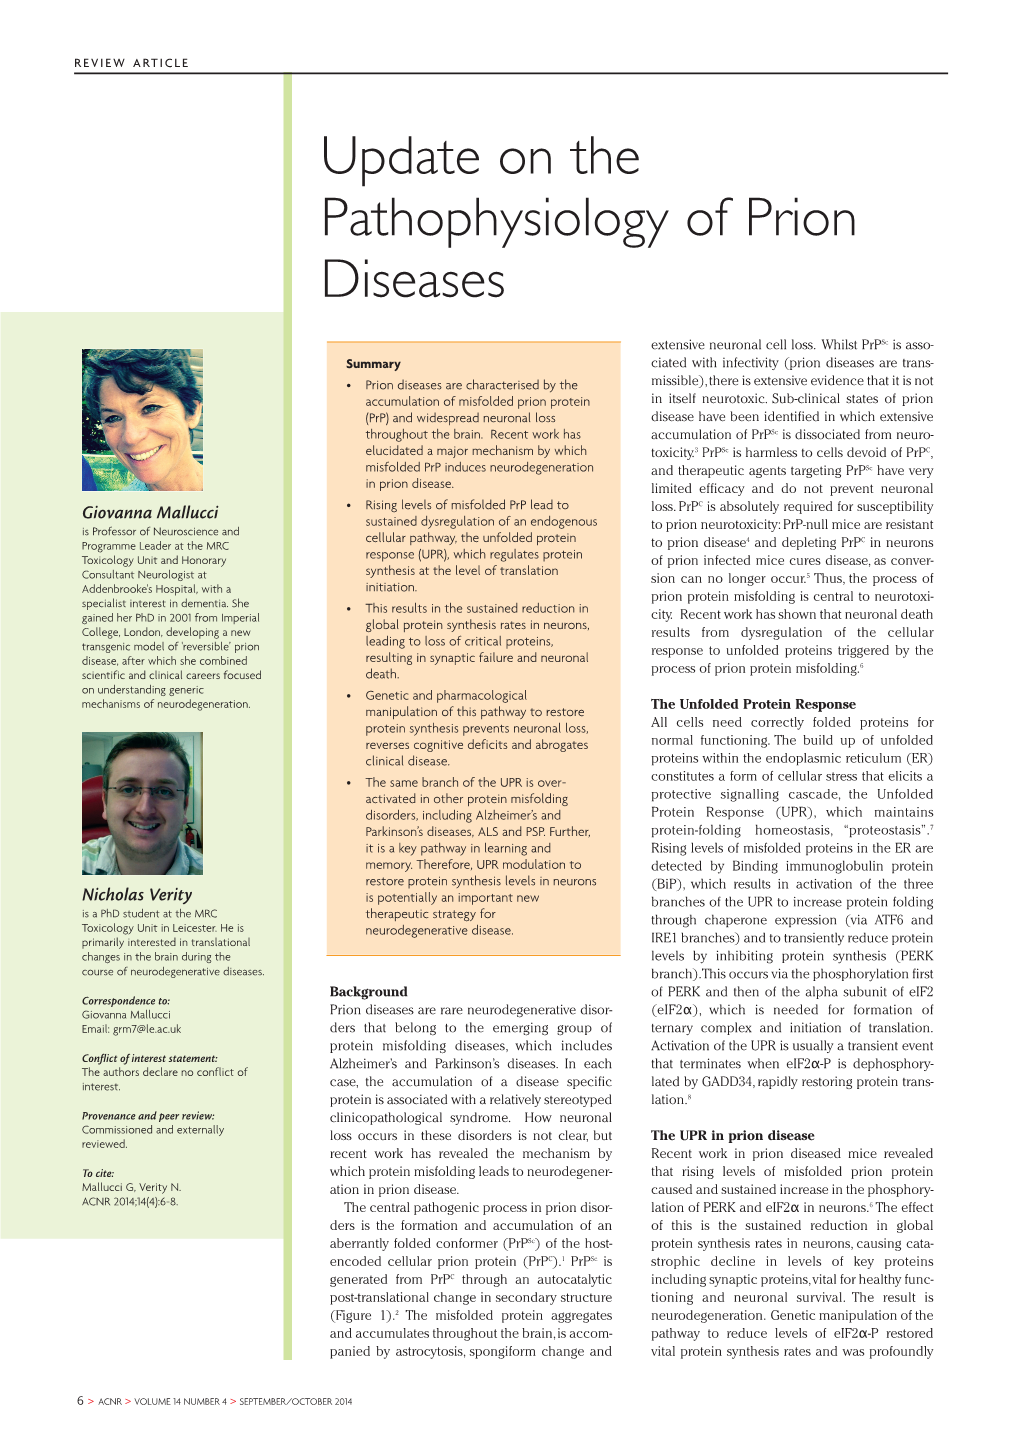 Update on the Pathophysiology of Prion Diseases